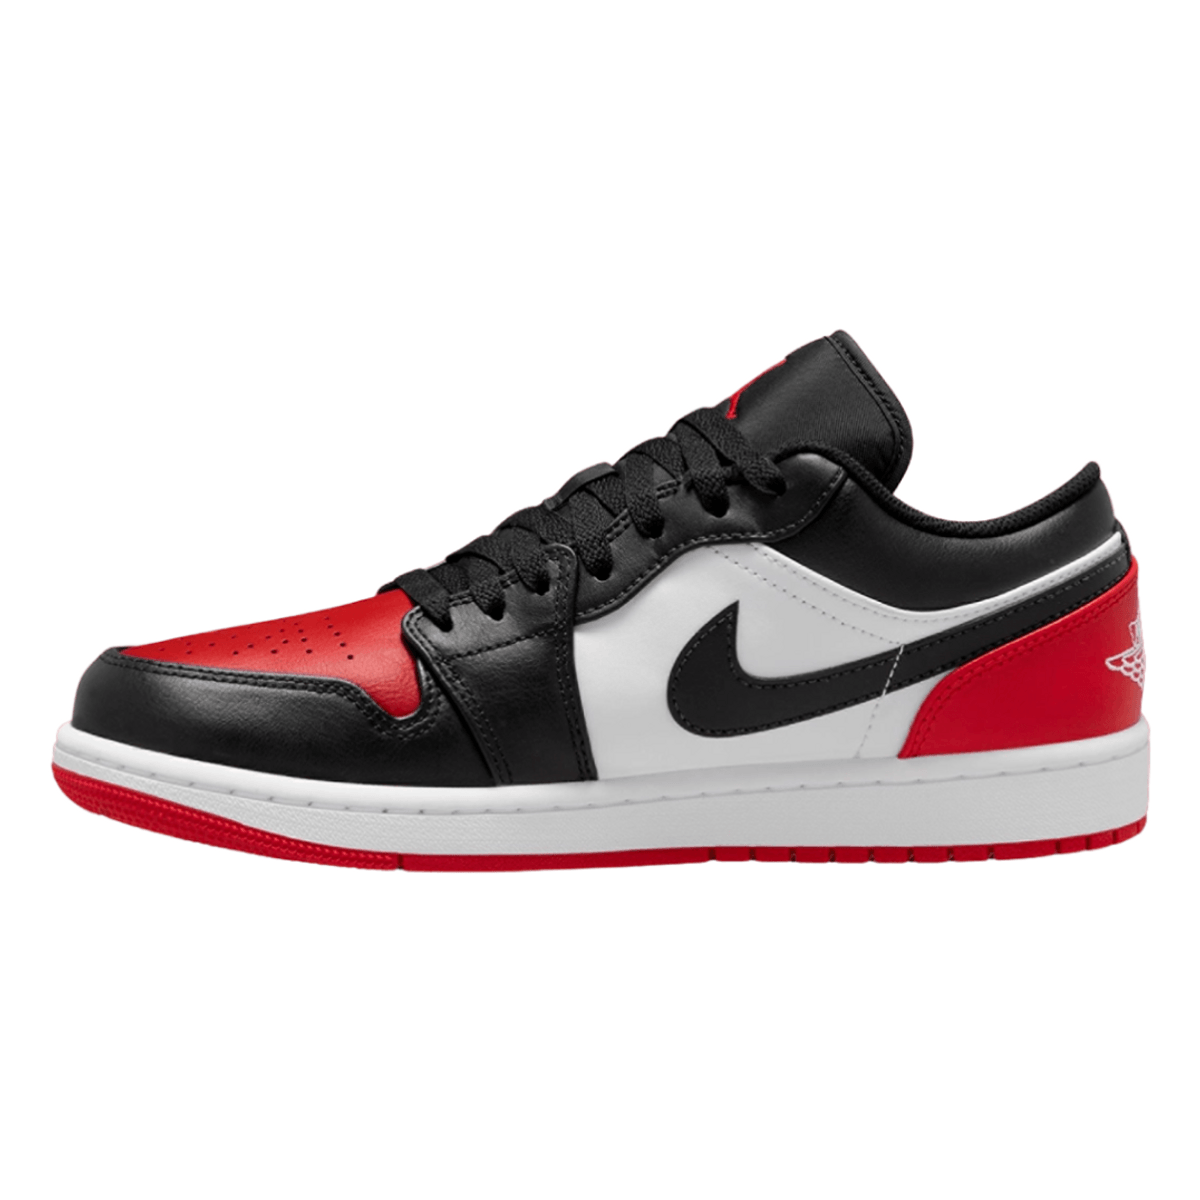 Jordan Brand Is Getting Ready For The Summer With An Air Jordan 1 Low Bred Toe